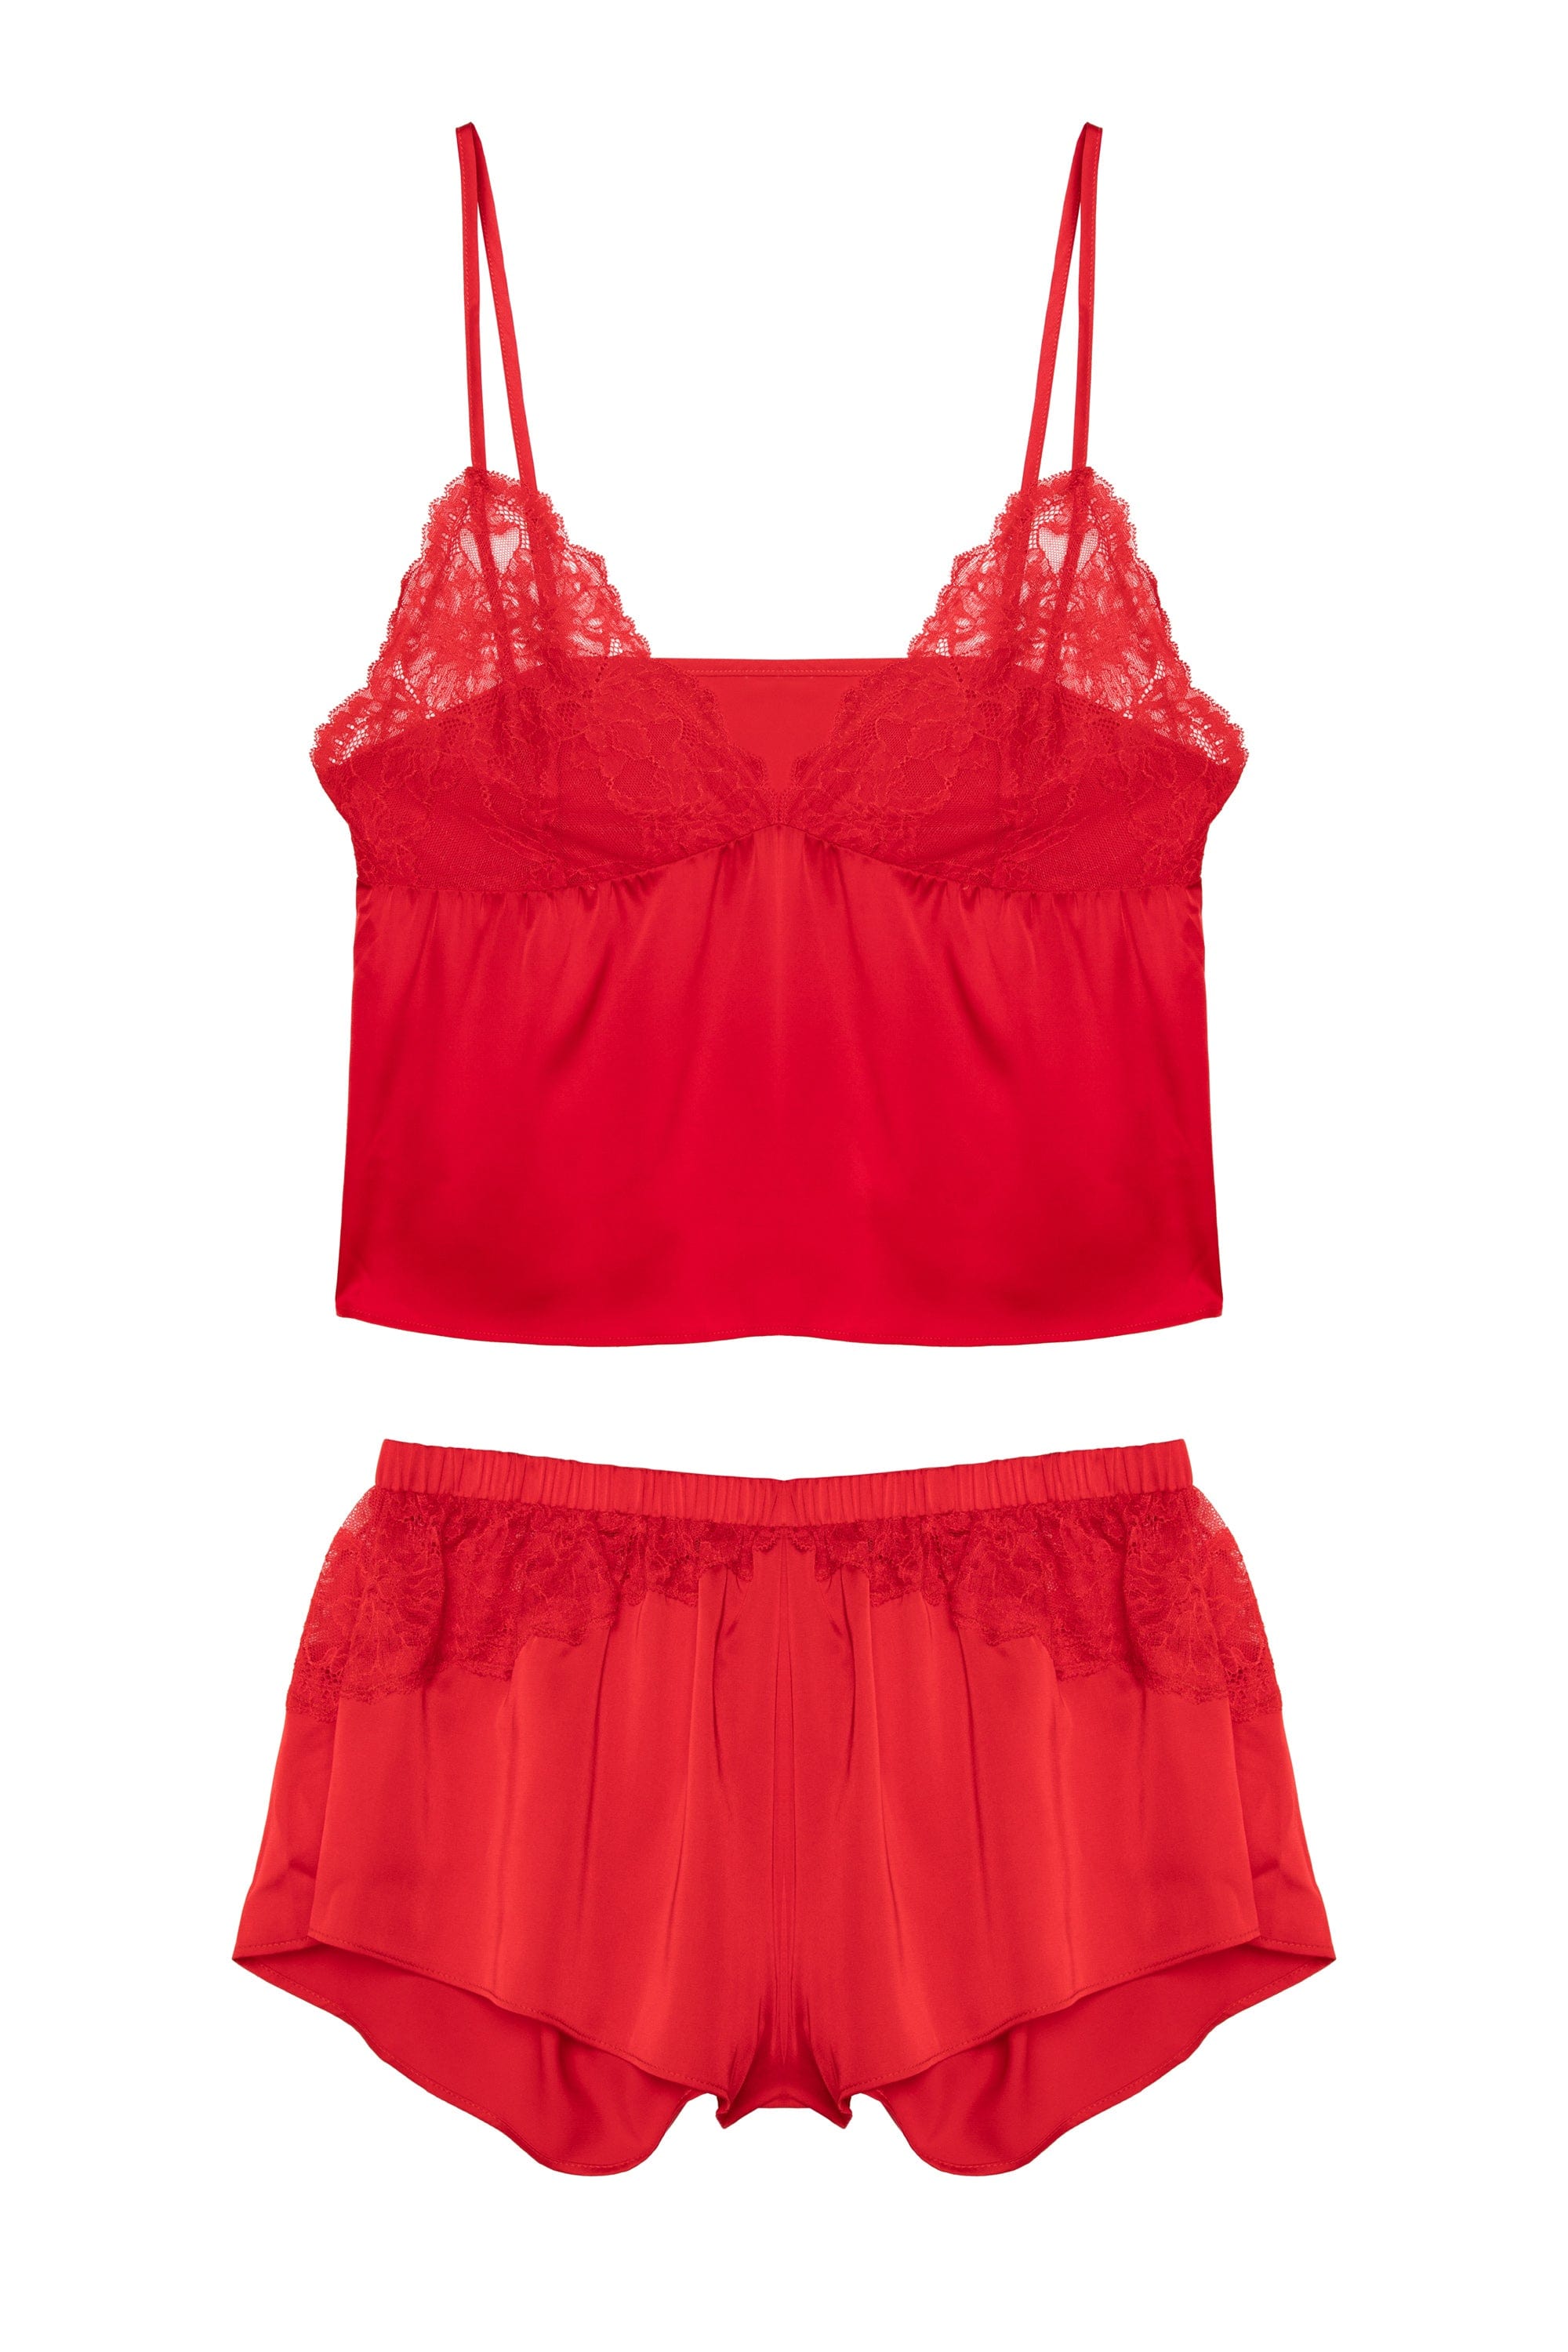 Rosie Red Satin and Lace Cami & Short Set